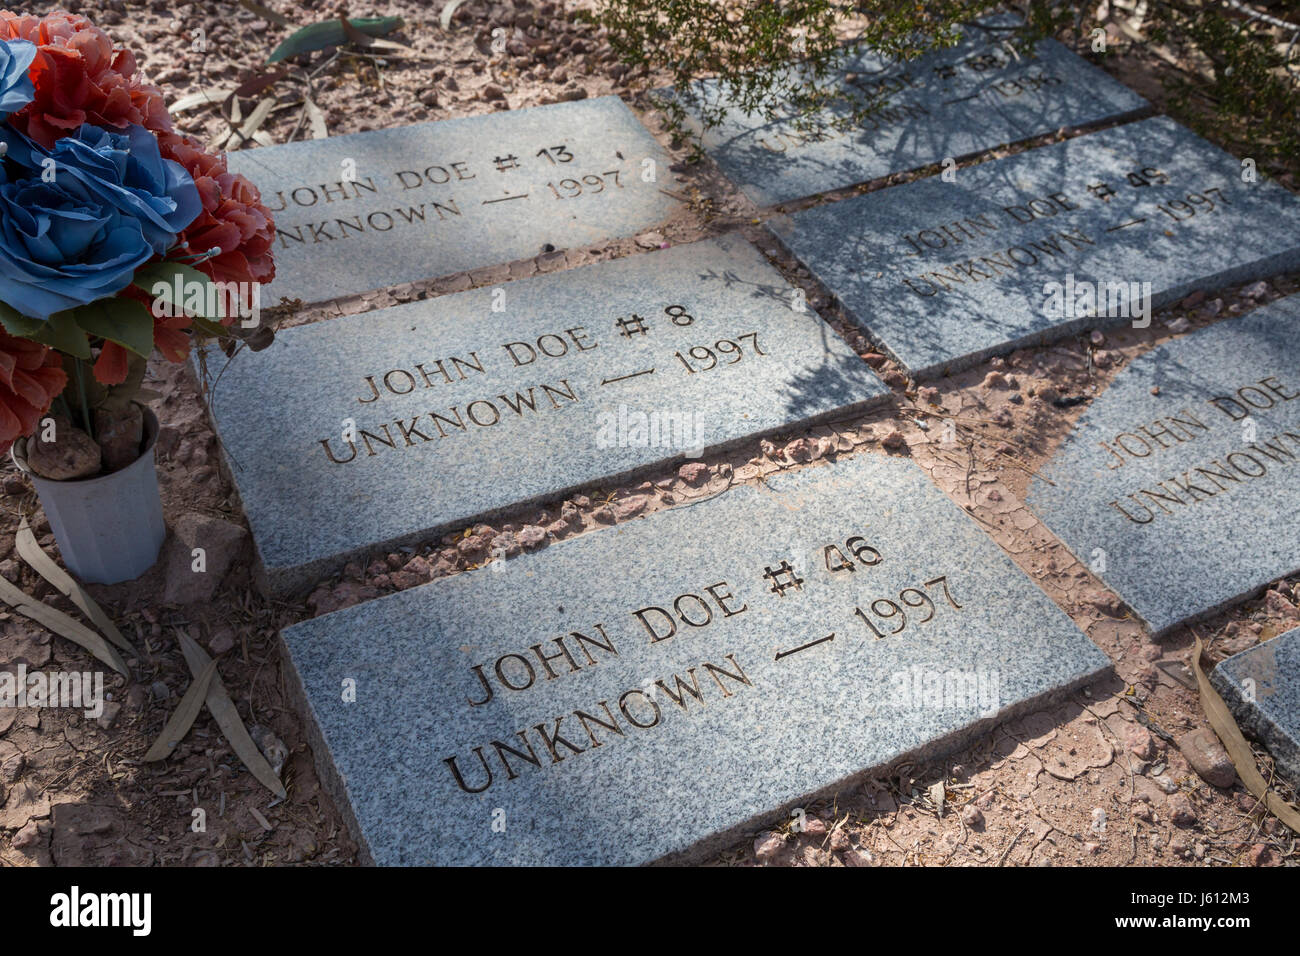 Tucson, Arizona - The Pima County Cemetery, where the indigent, the homeless, and unidentified have been buried, including migrants who died crossing  Stock Photo